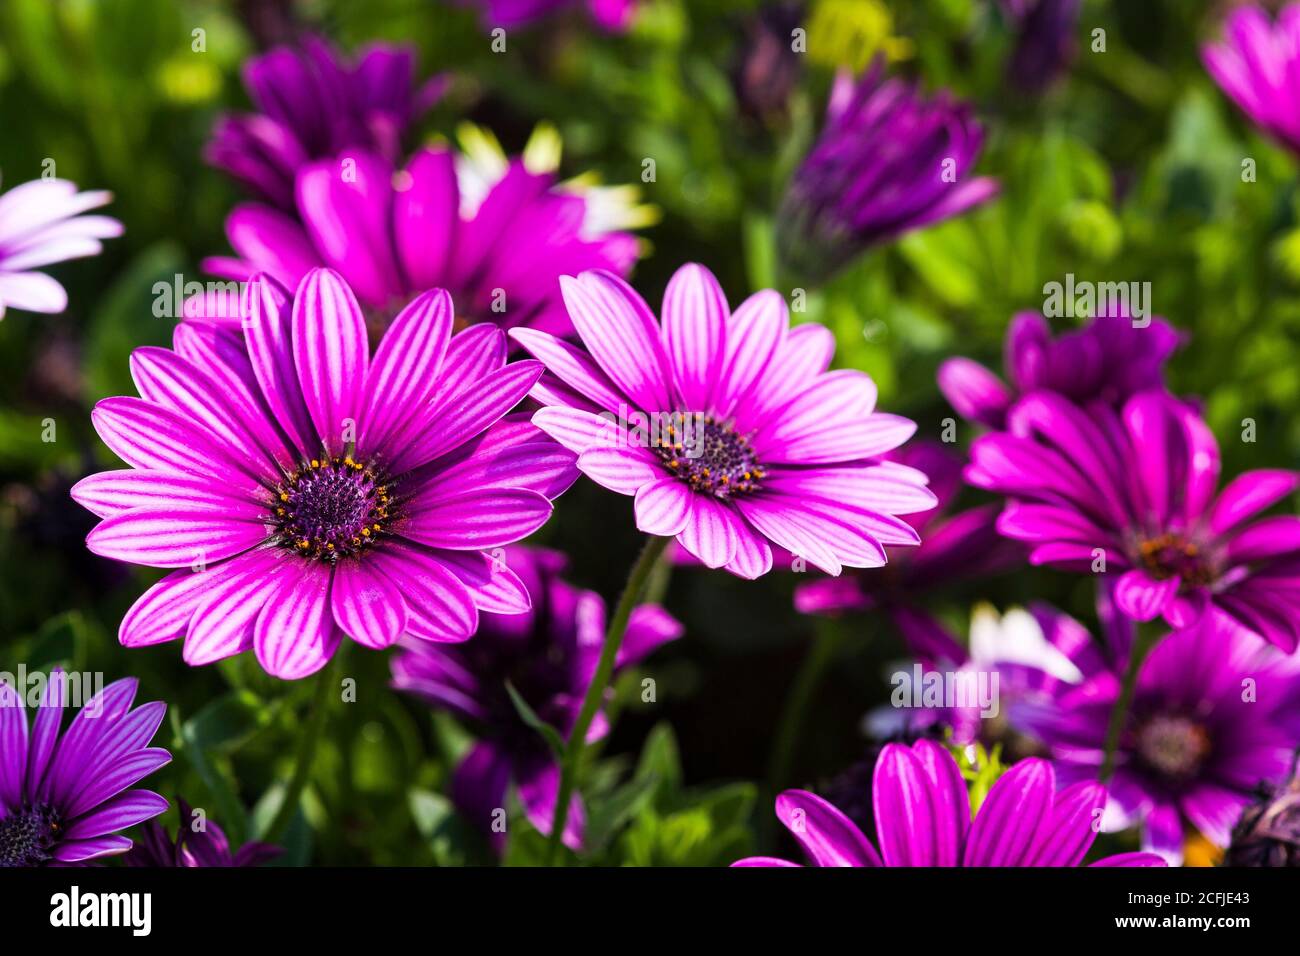 Daisy flowers with a dewdrop in the leaves, outdoor garden. Stock Photo